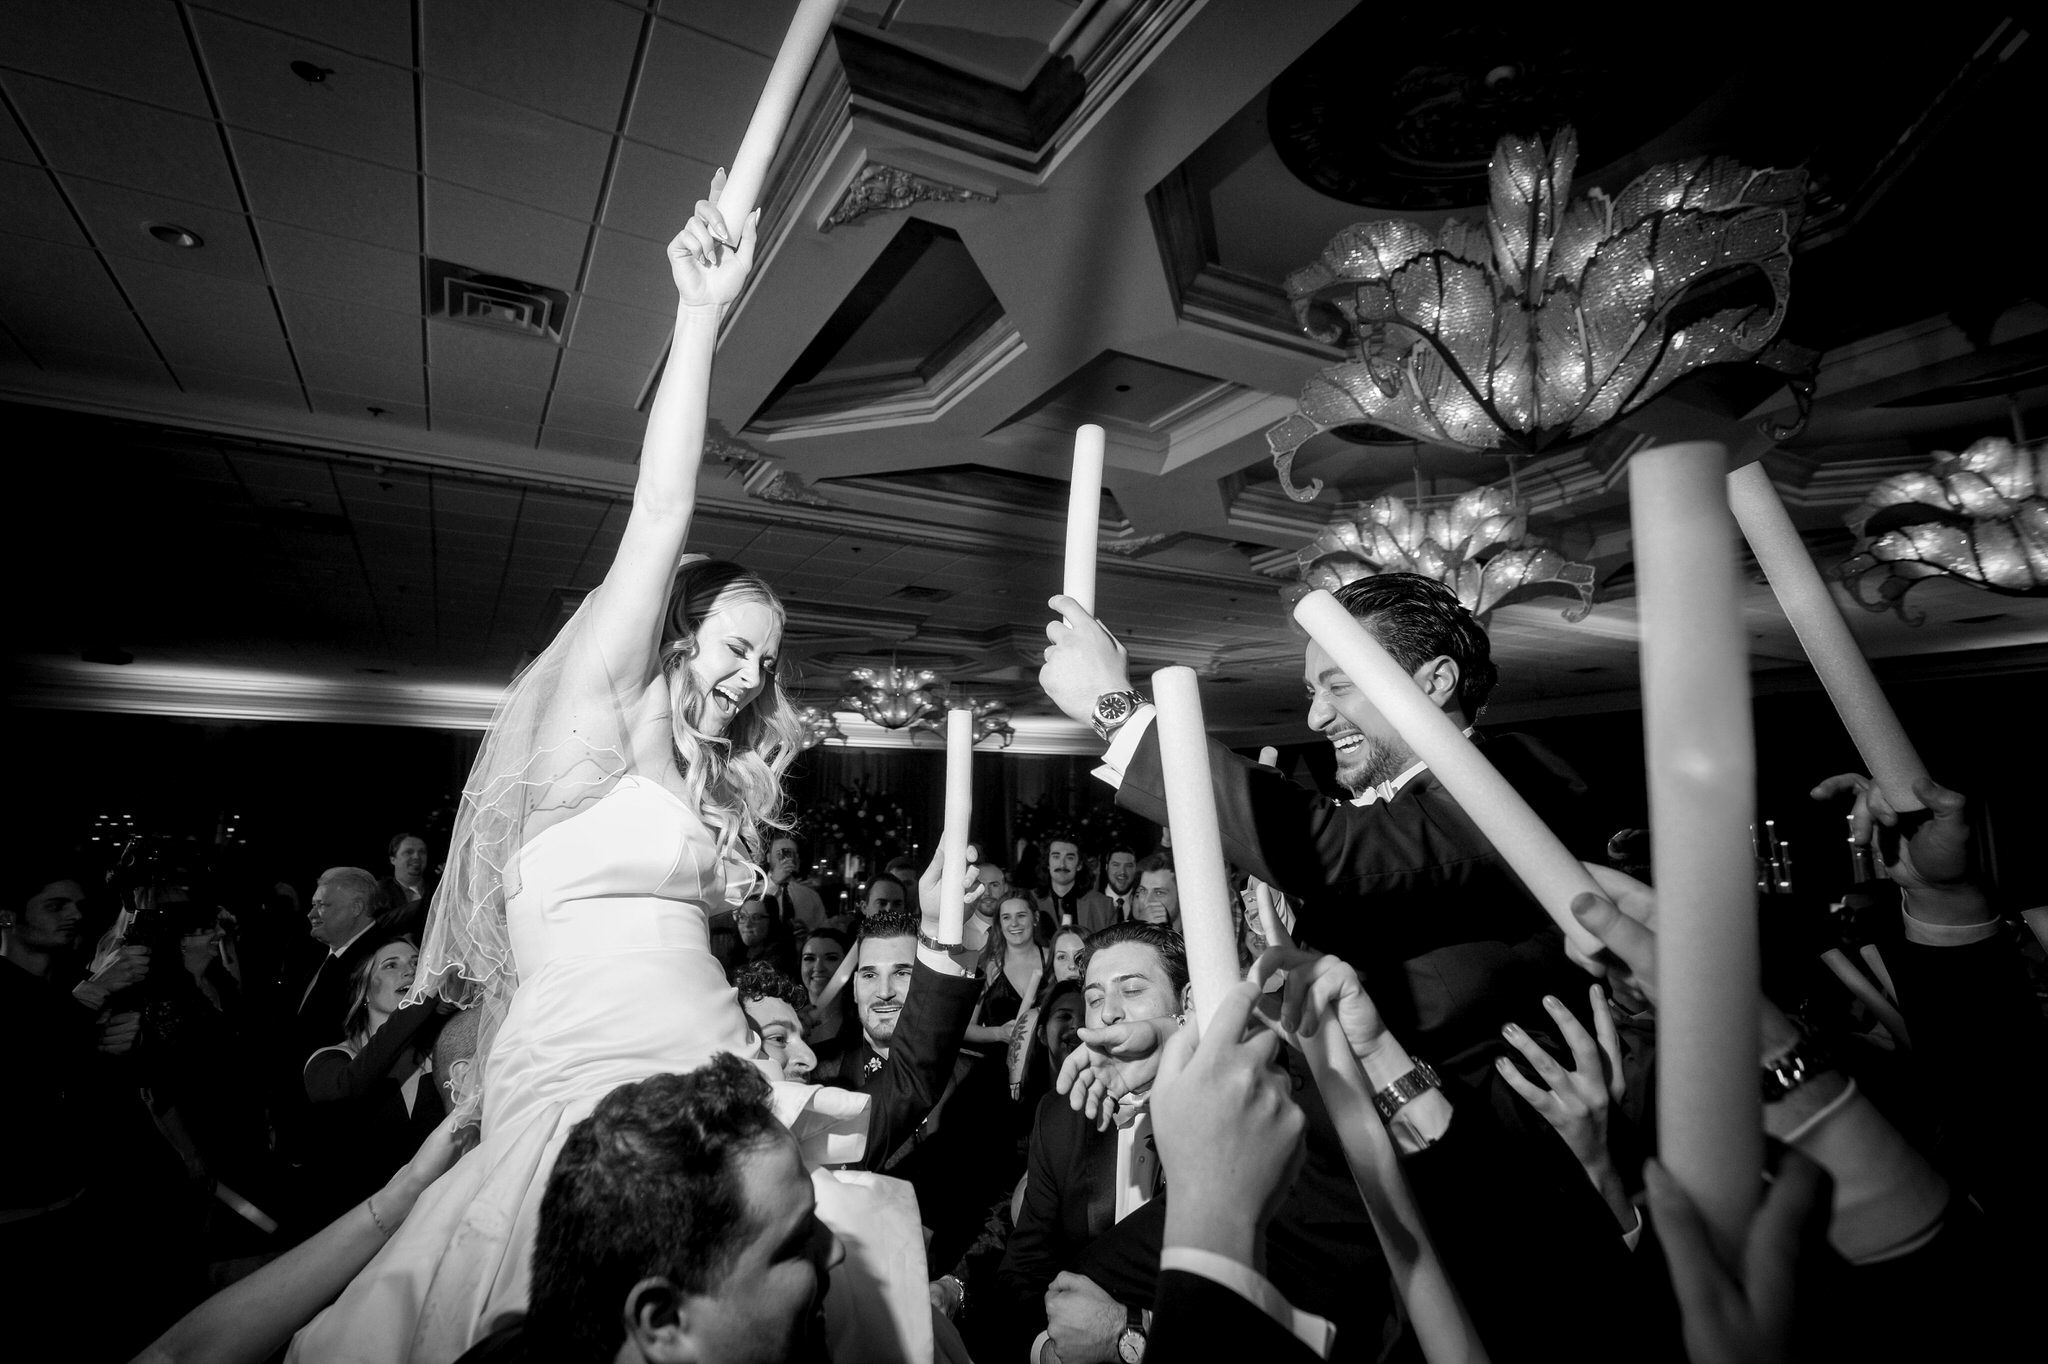 The bride and groom are lifted on the shoulders of groomsmen on the dance floor at a Penna's of Sterling wedding.